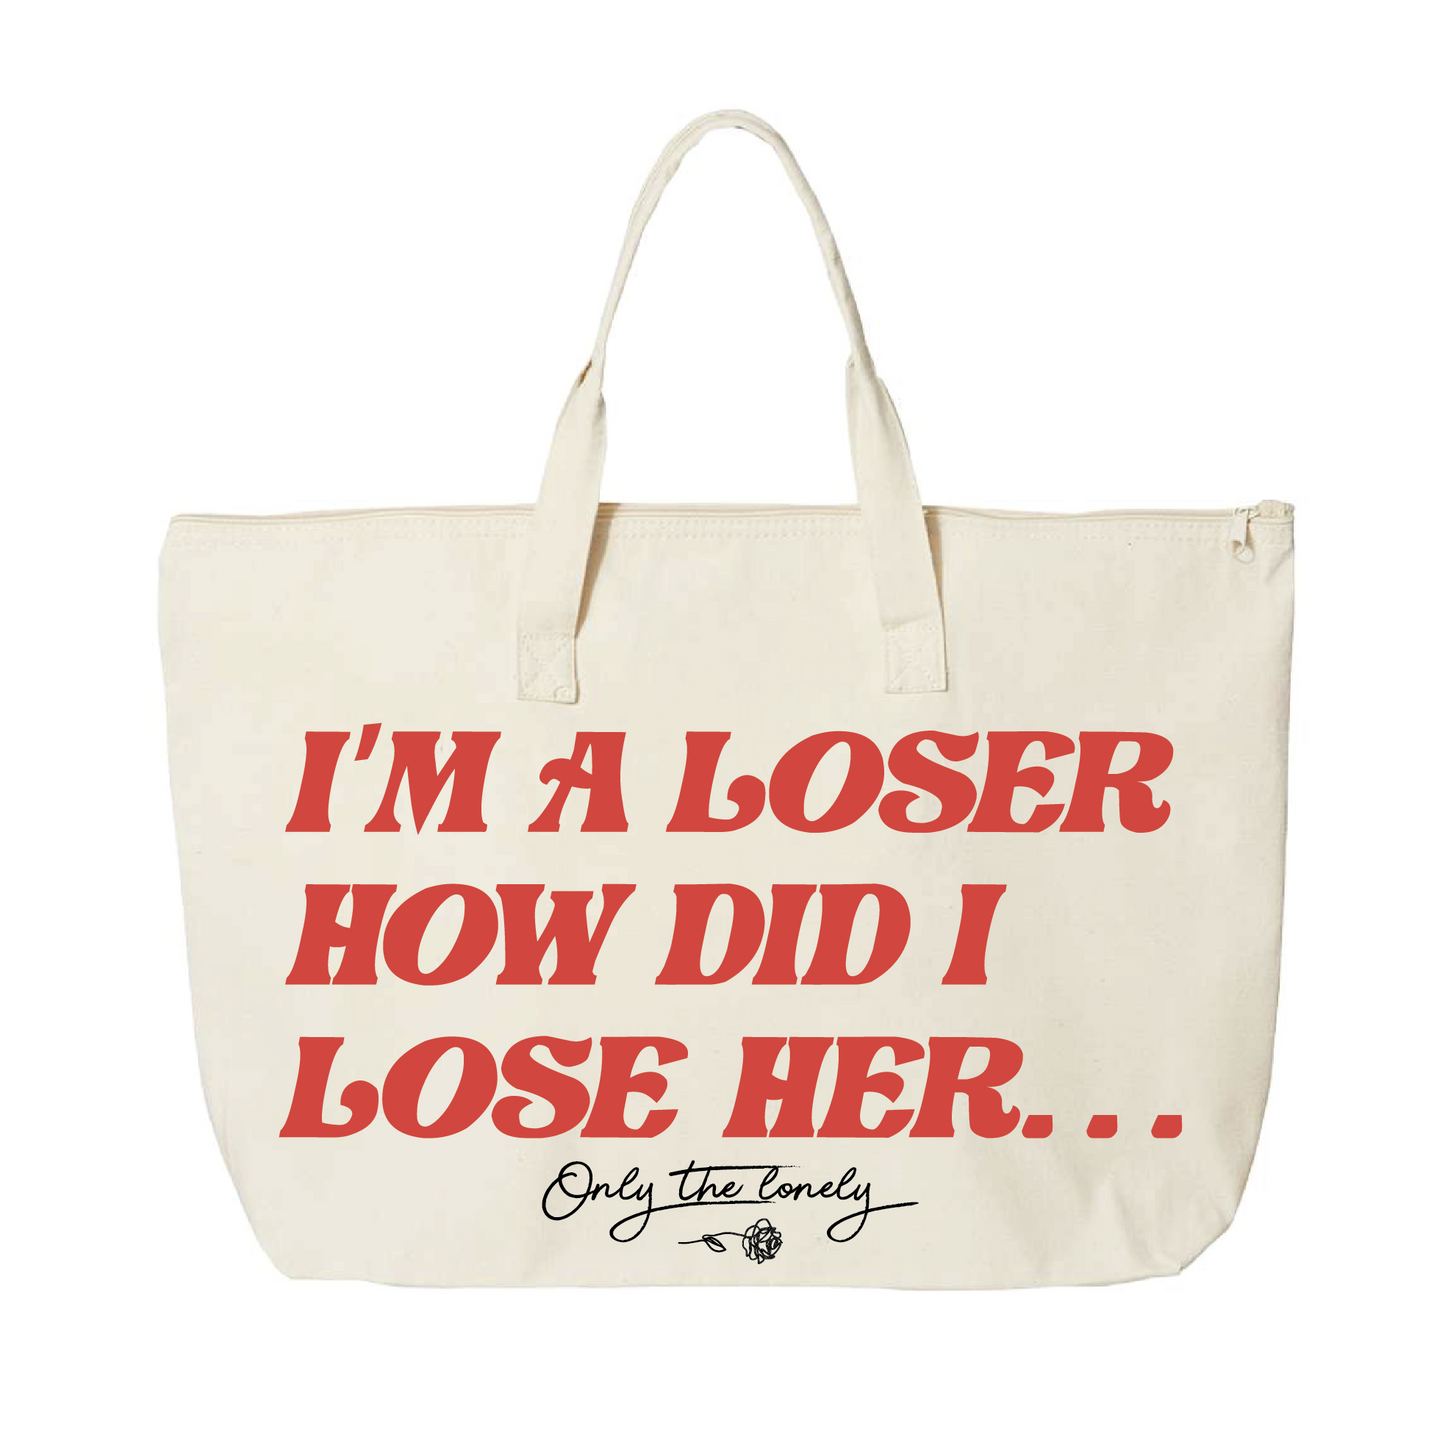 ONLY THE LONELY "I'M A LOSER HOW DID I LOSE HER" TOTE BAG